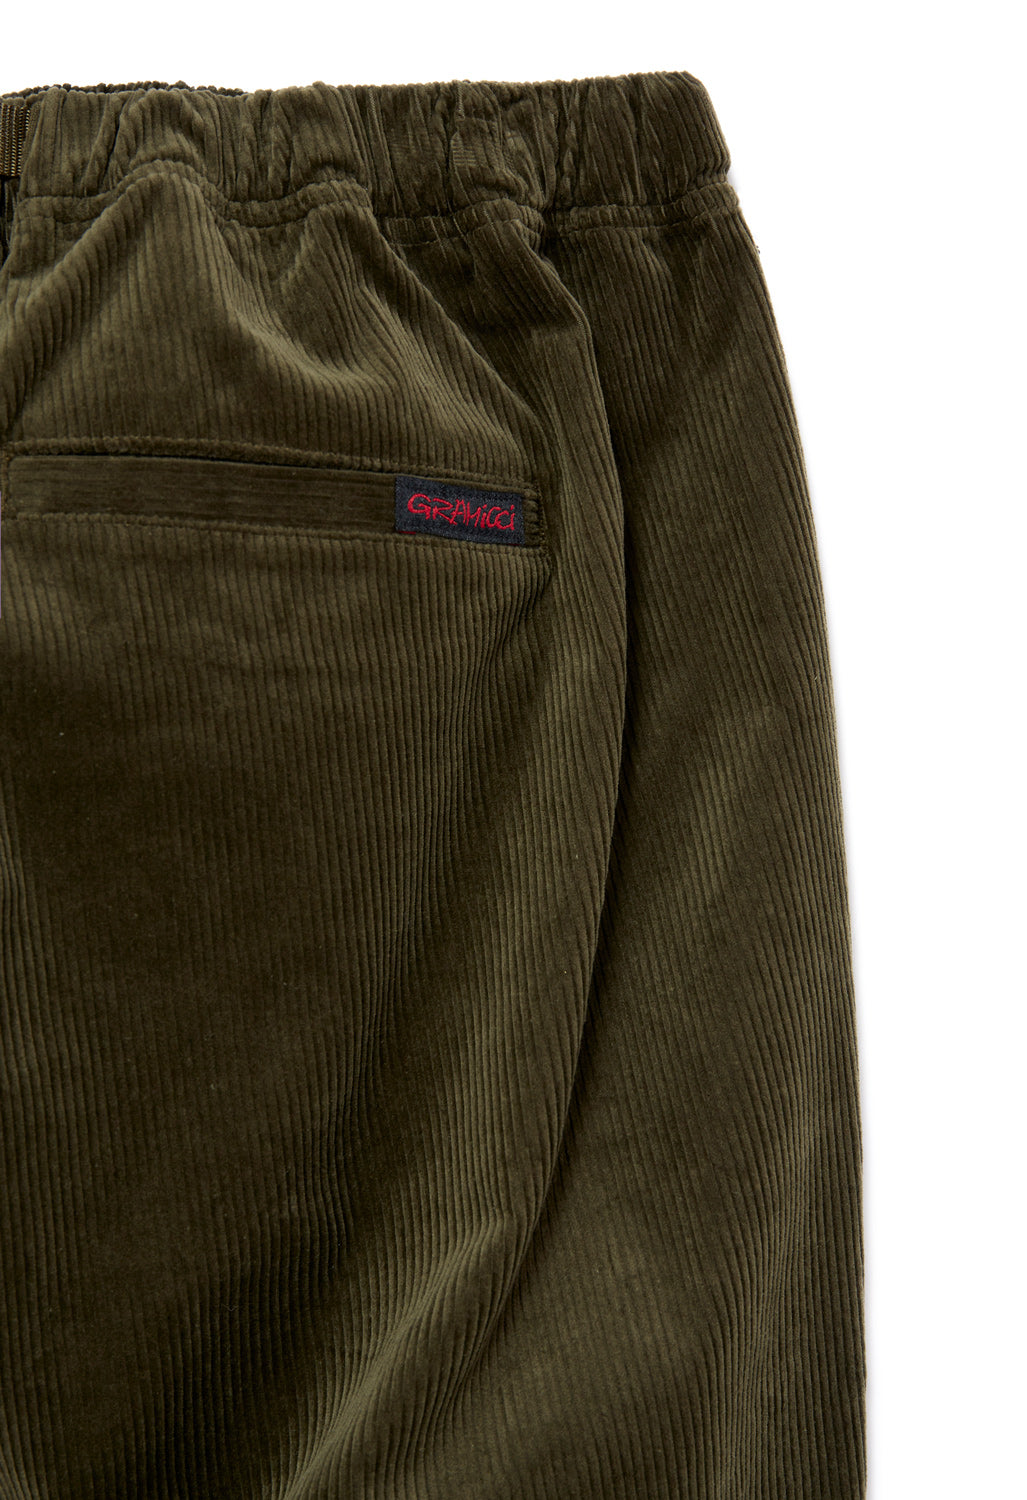 Gramicci Corduroy Loose Tapered Pants - Olive